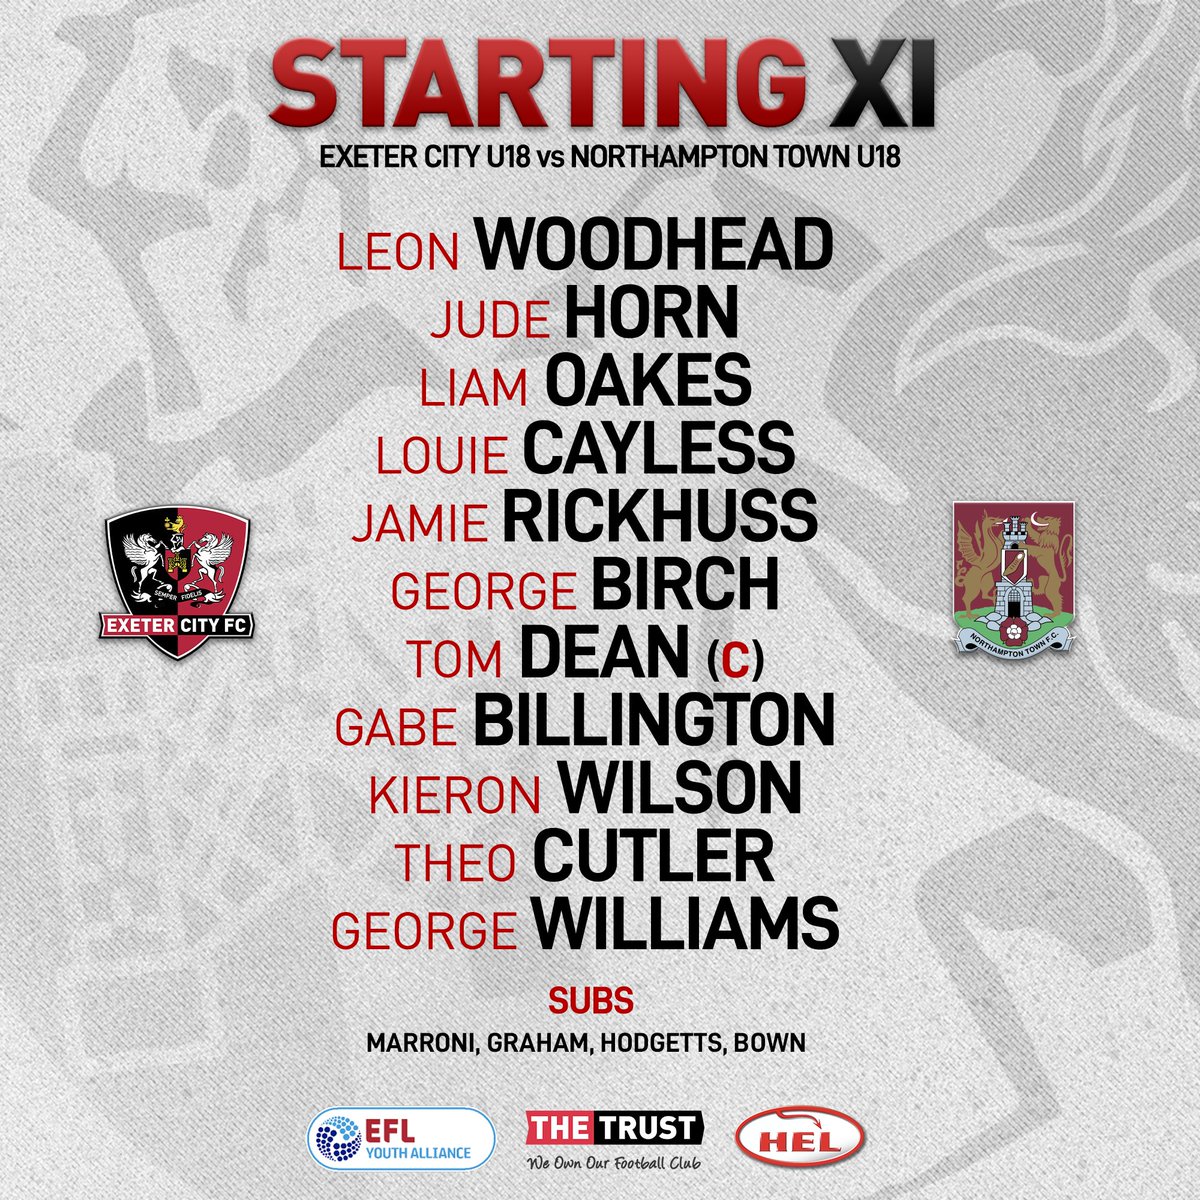 📝 TEAM NEWS 🆚 @NTFC_Academy Here is how we line up for today's 11am kick-off, with a return to action for @GabeBillington for the first time since suffering a significant injury back in August - go well Gabe! #ECFC #SemperFidelis